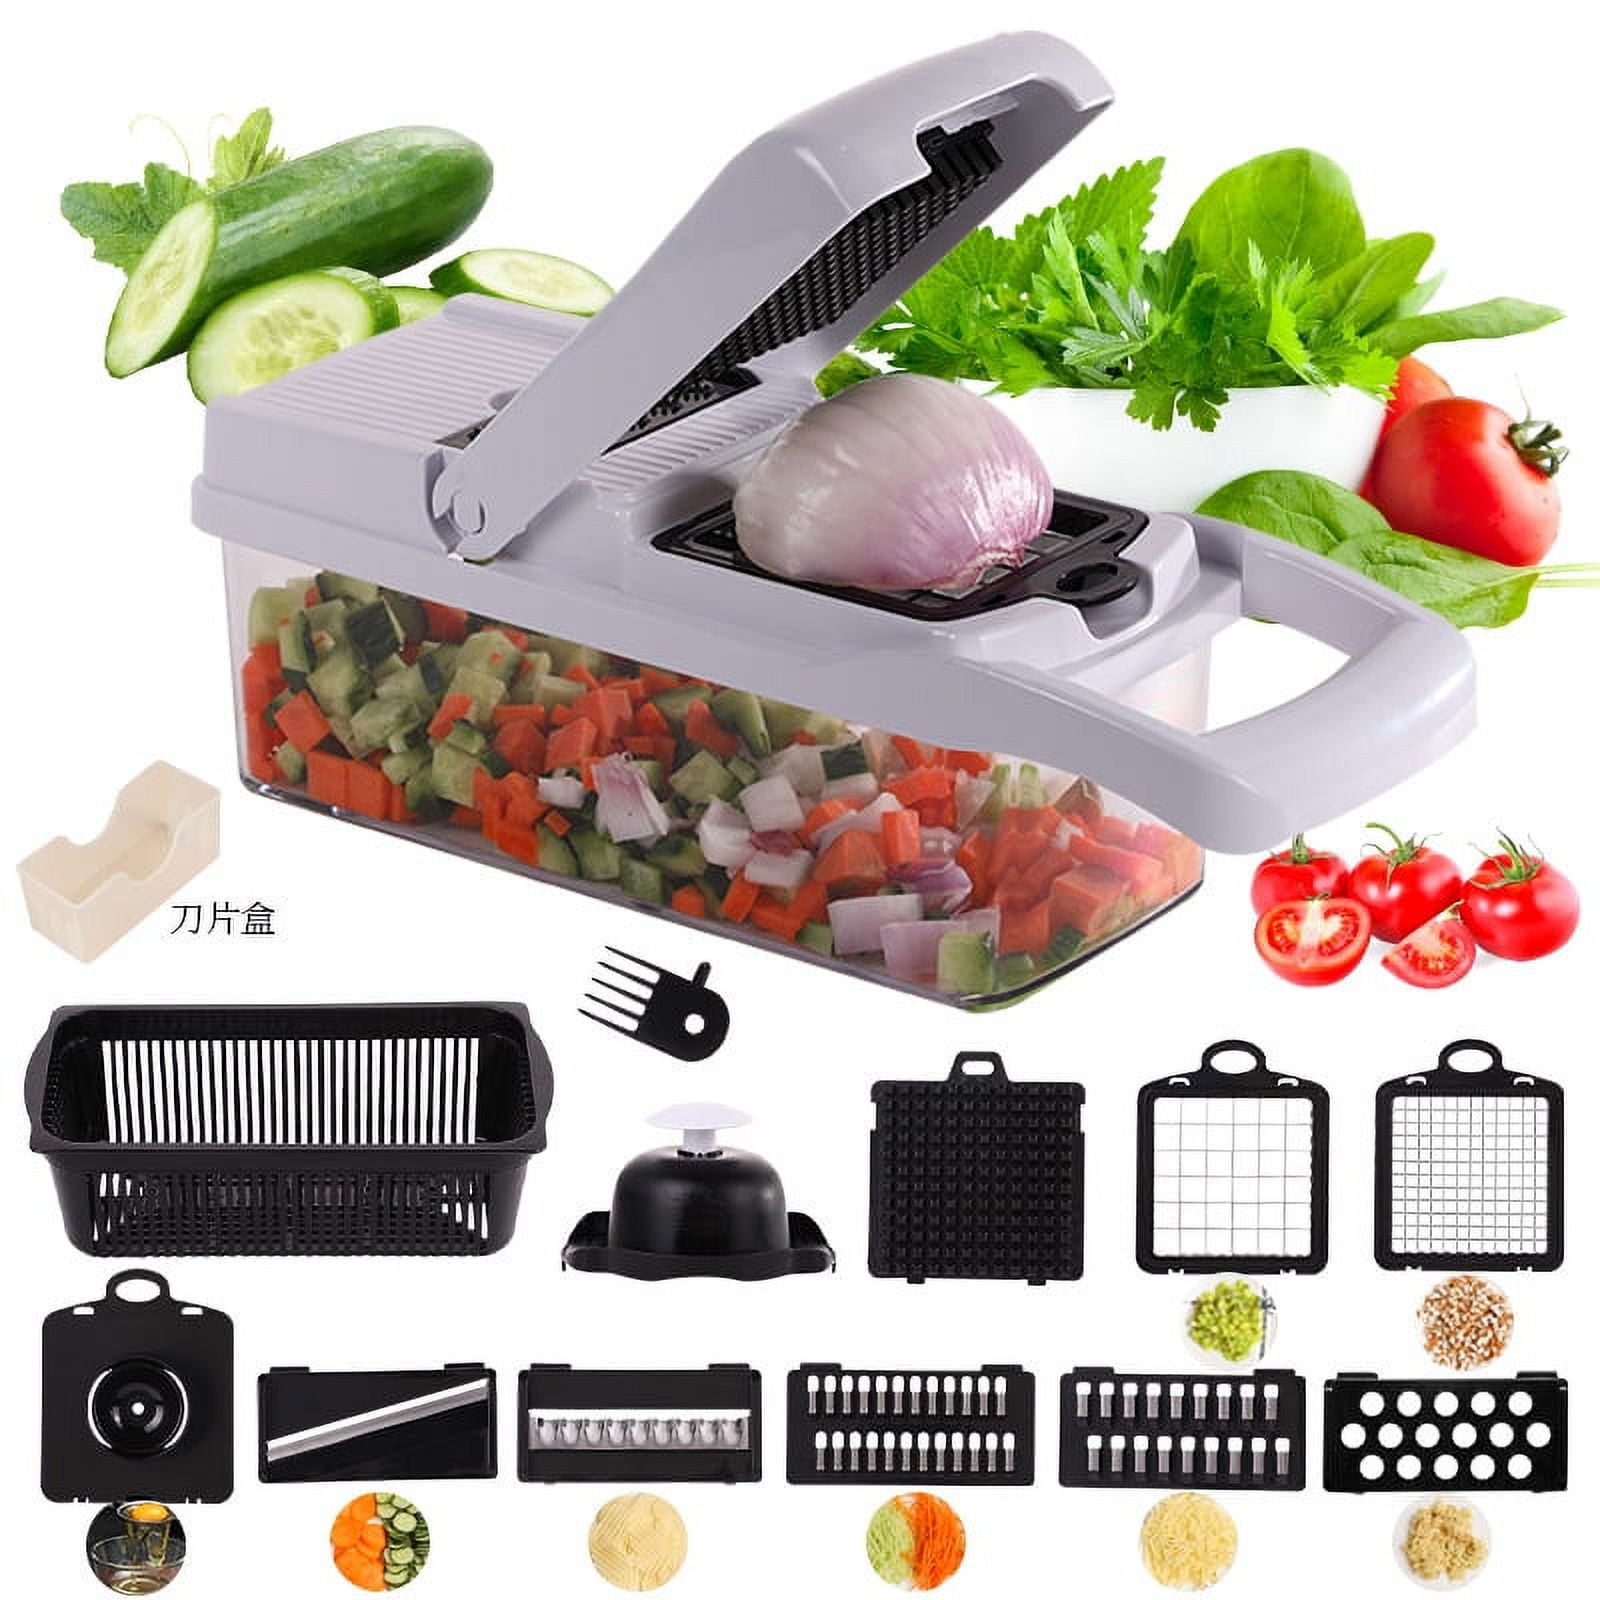 14/16/22pcs Set Vegetable Chopper, Multi-functional Fruit Slicer, Manual  Food Chopper, Vegetable Slicer, Slicing Machine With Container And Hand  Guard, Onion Chopper